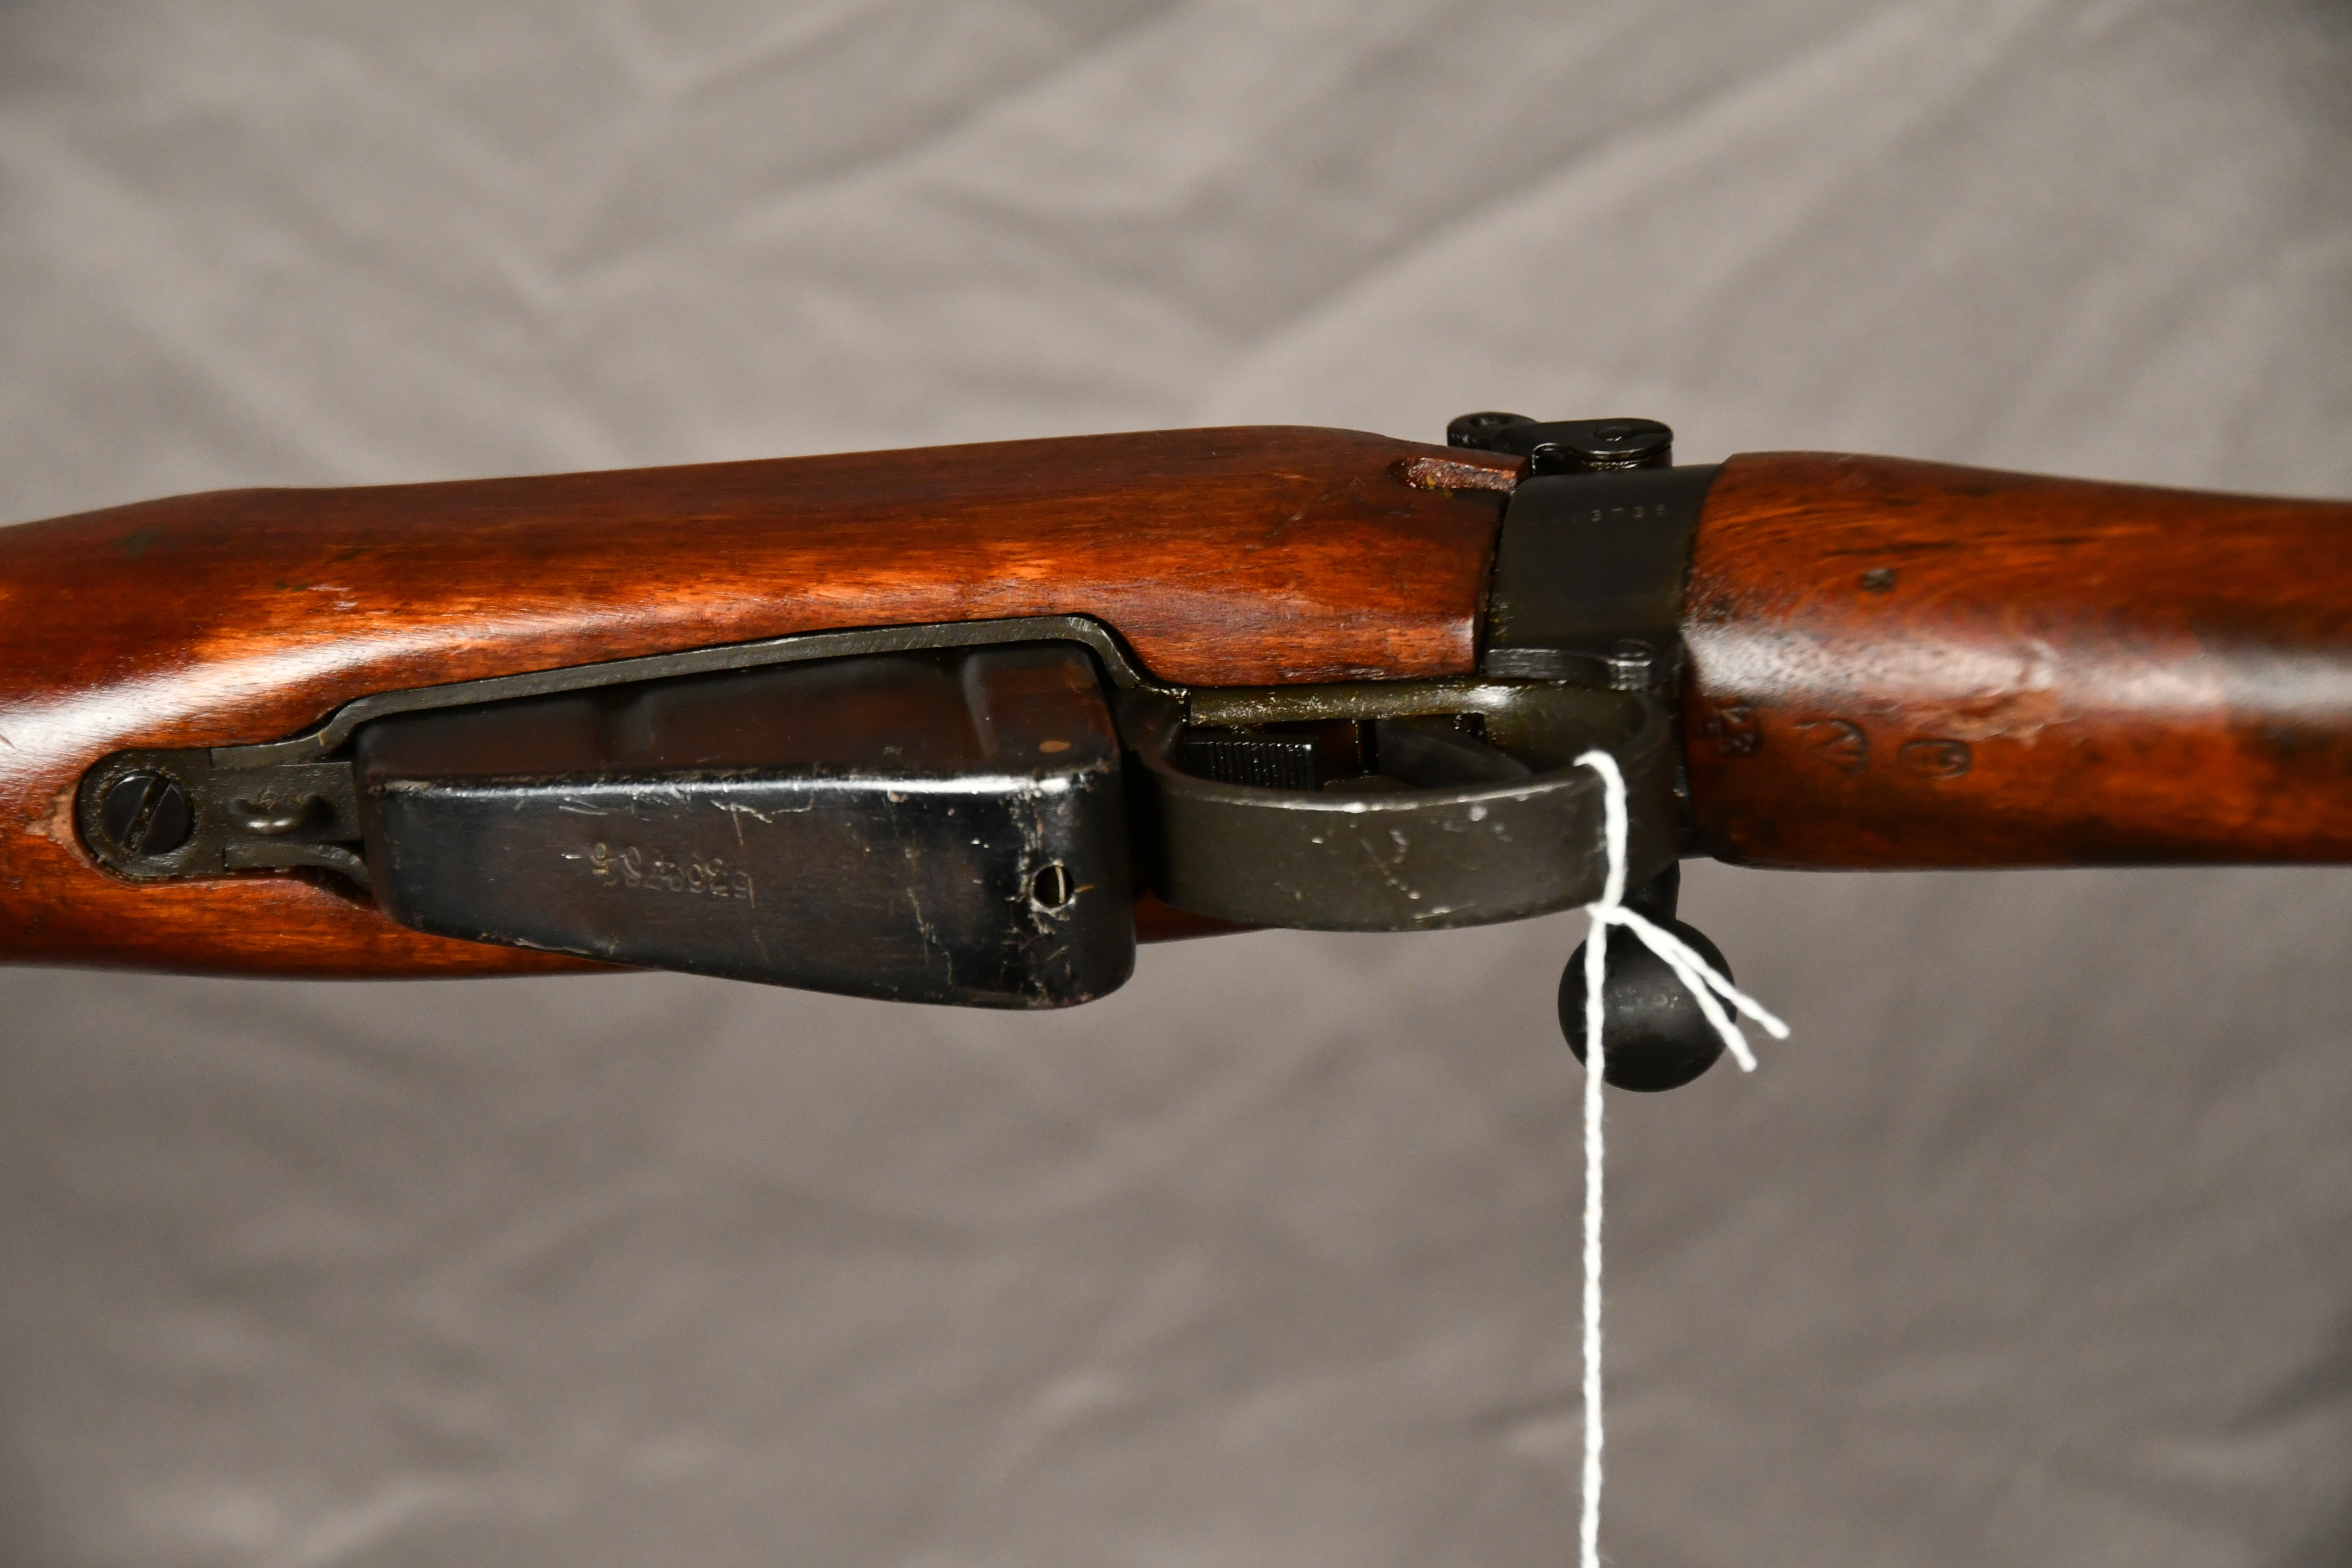 British Enfield No. 4 MK I Long Branch, .303 cal. bolt action military  rifle, 25 barrel, WWII, 1942